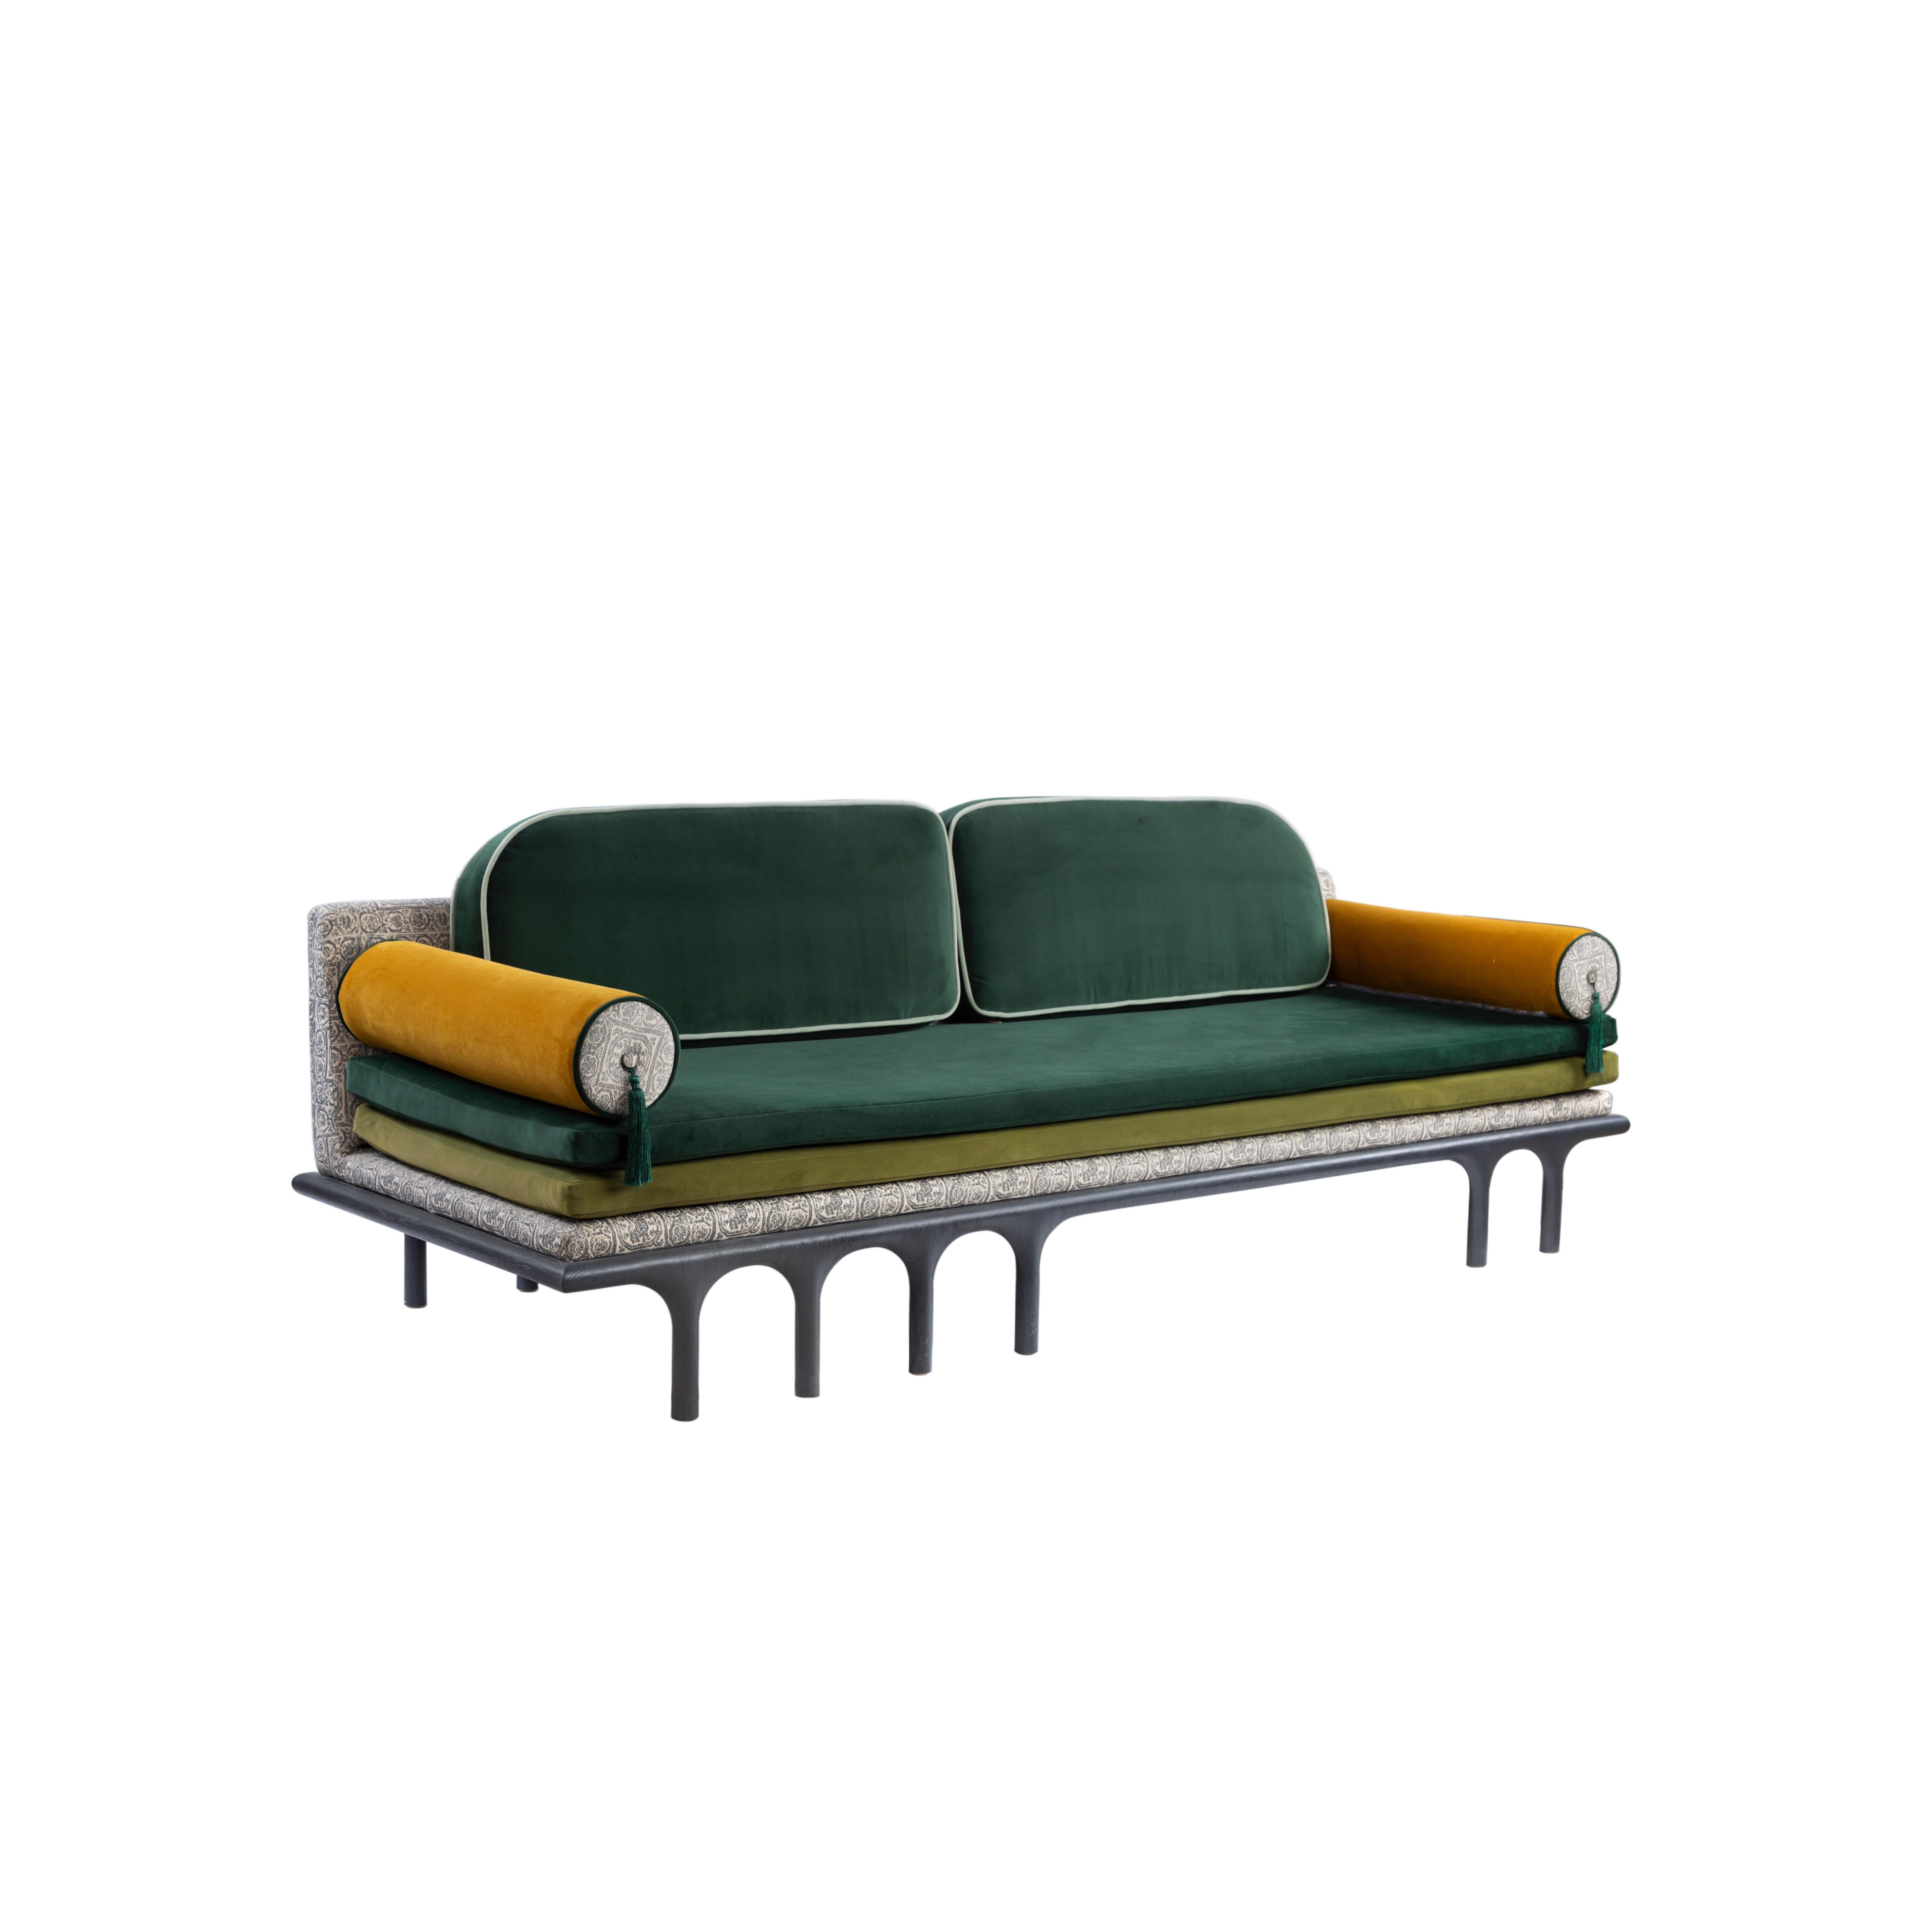 Charcoal Black Hand-Carved Massive Oak Wood Sofa with Velvet Green Upholstery.
Inspired by the legendary Hassan Fathy, this sofa pays homage to his architectural philosophies and principles, from arches for ventilation, to a simpler lifestyle and